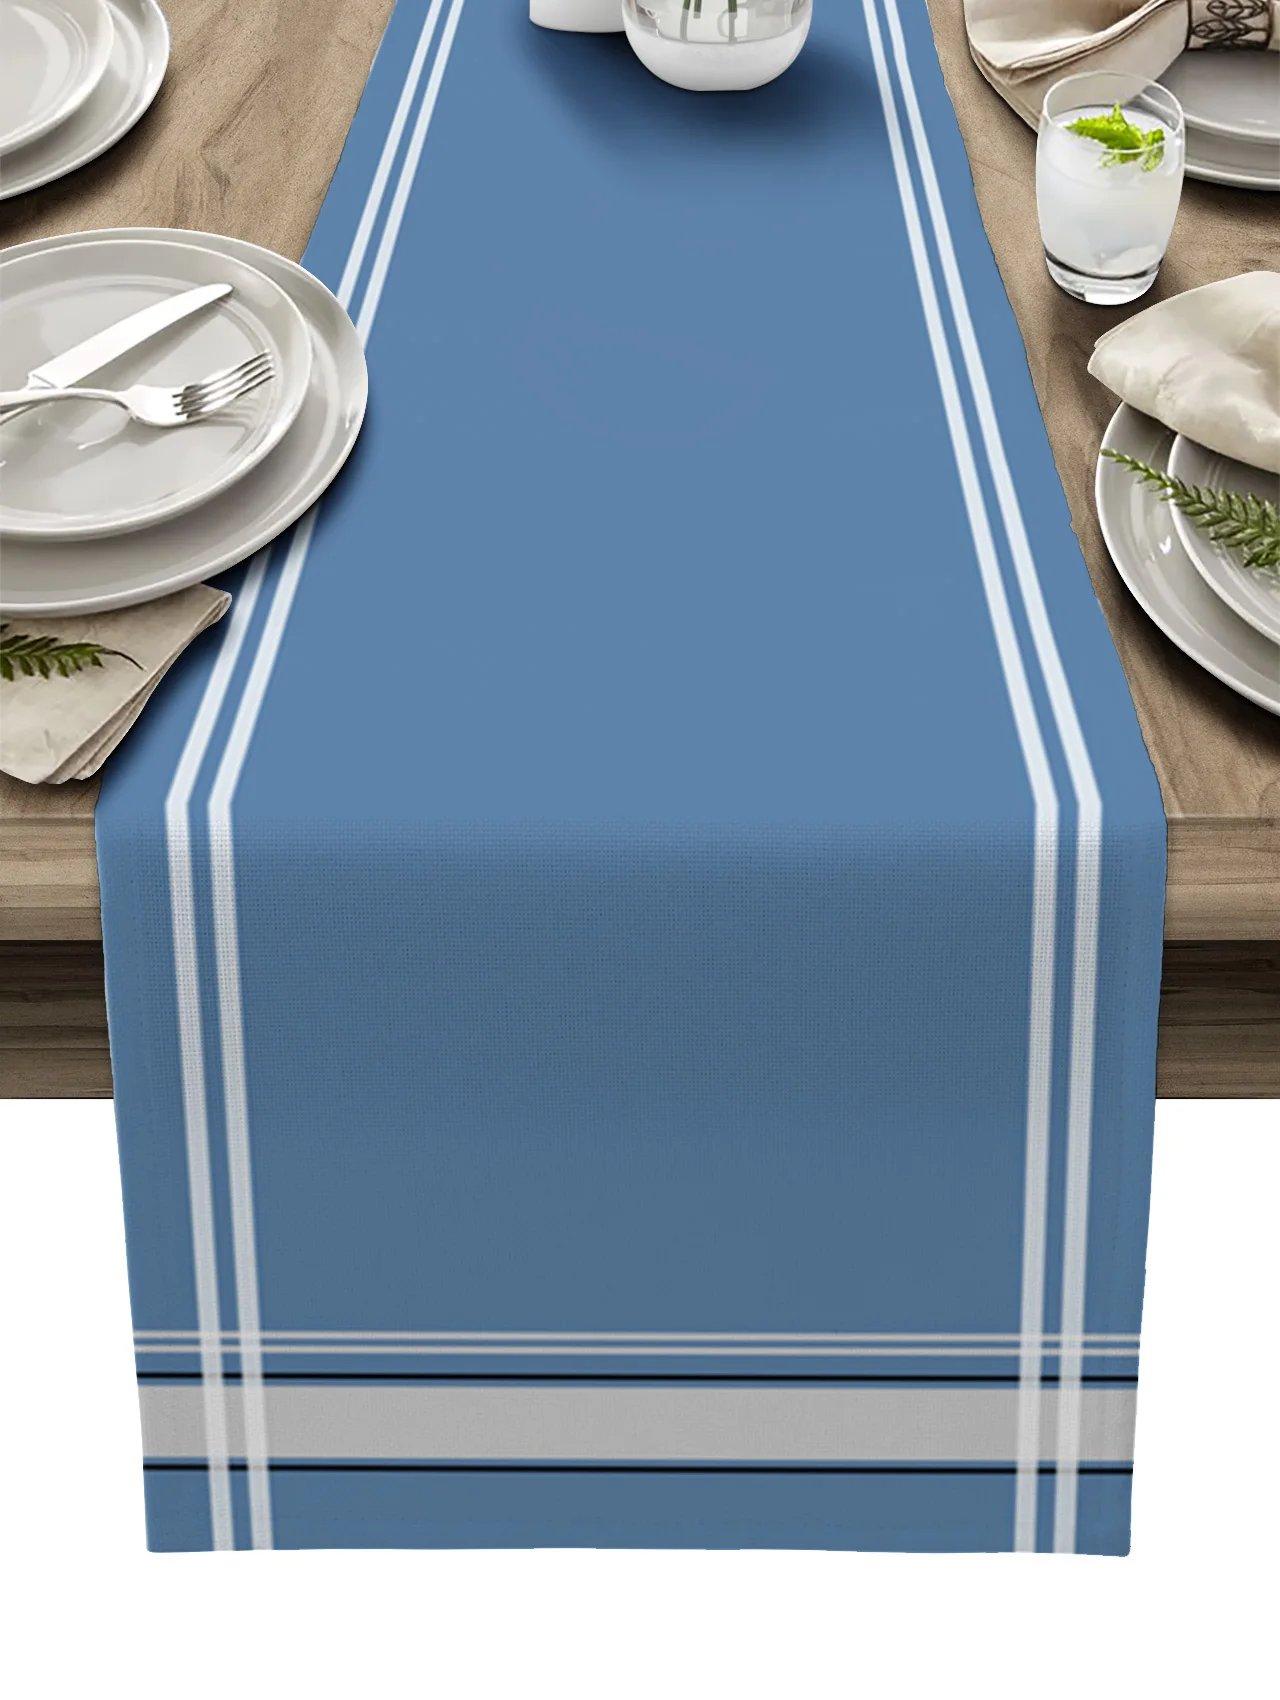 

Blue Stripes Texture Table Runner Home Wedding Banquet Festival Party Hotel Table Decoration Table Cover